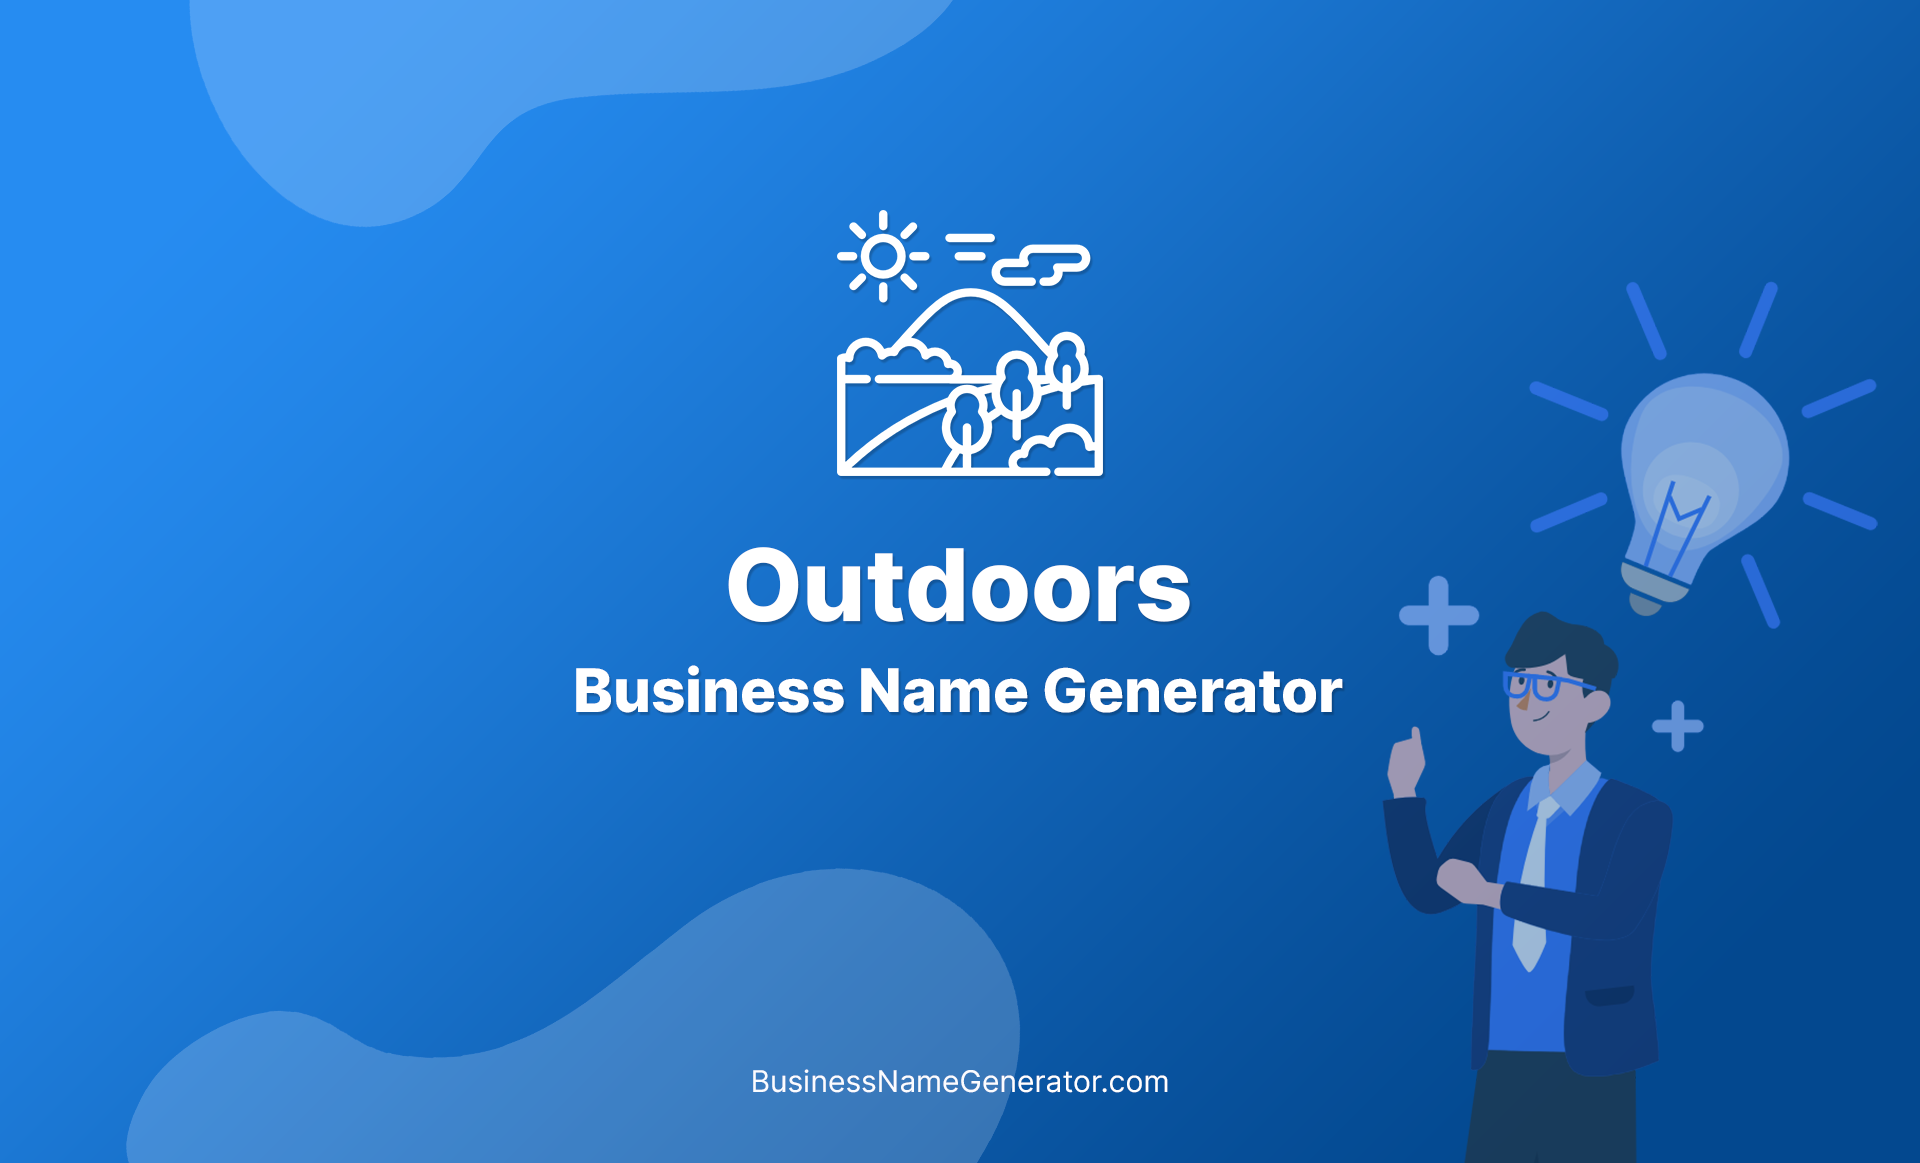 Outdoors Business Name Generator